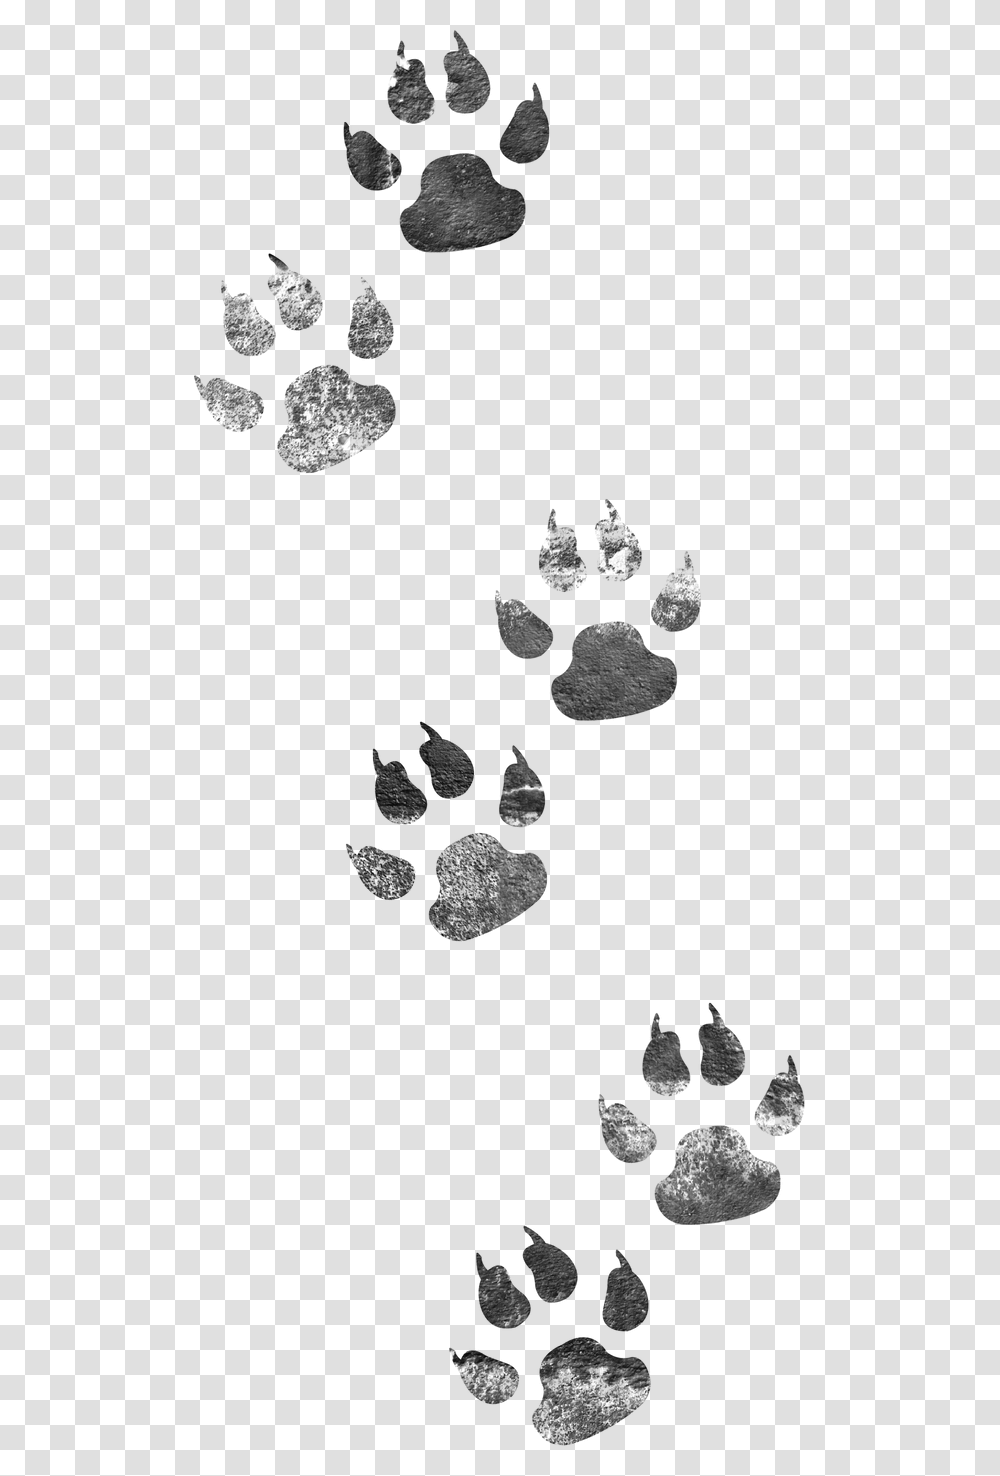 Footprints Dog Cat Image High Quality Clipart Animal Tracks Clip Art, Stencil, Silhouette Transparent Png